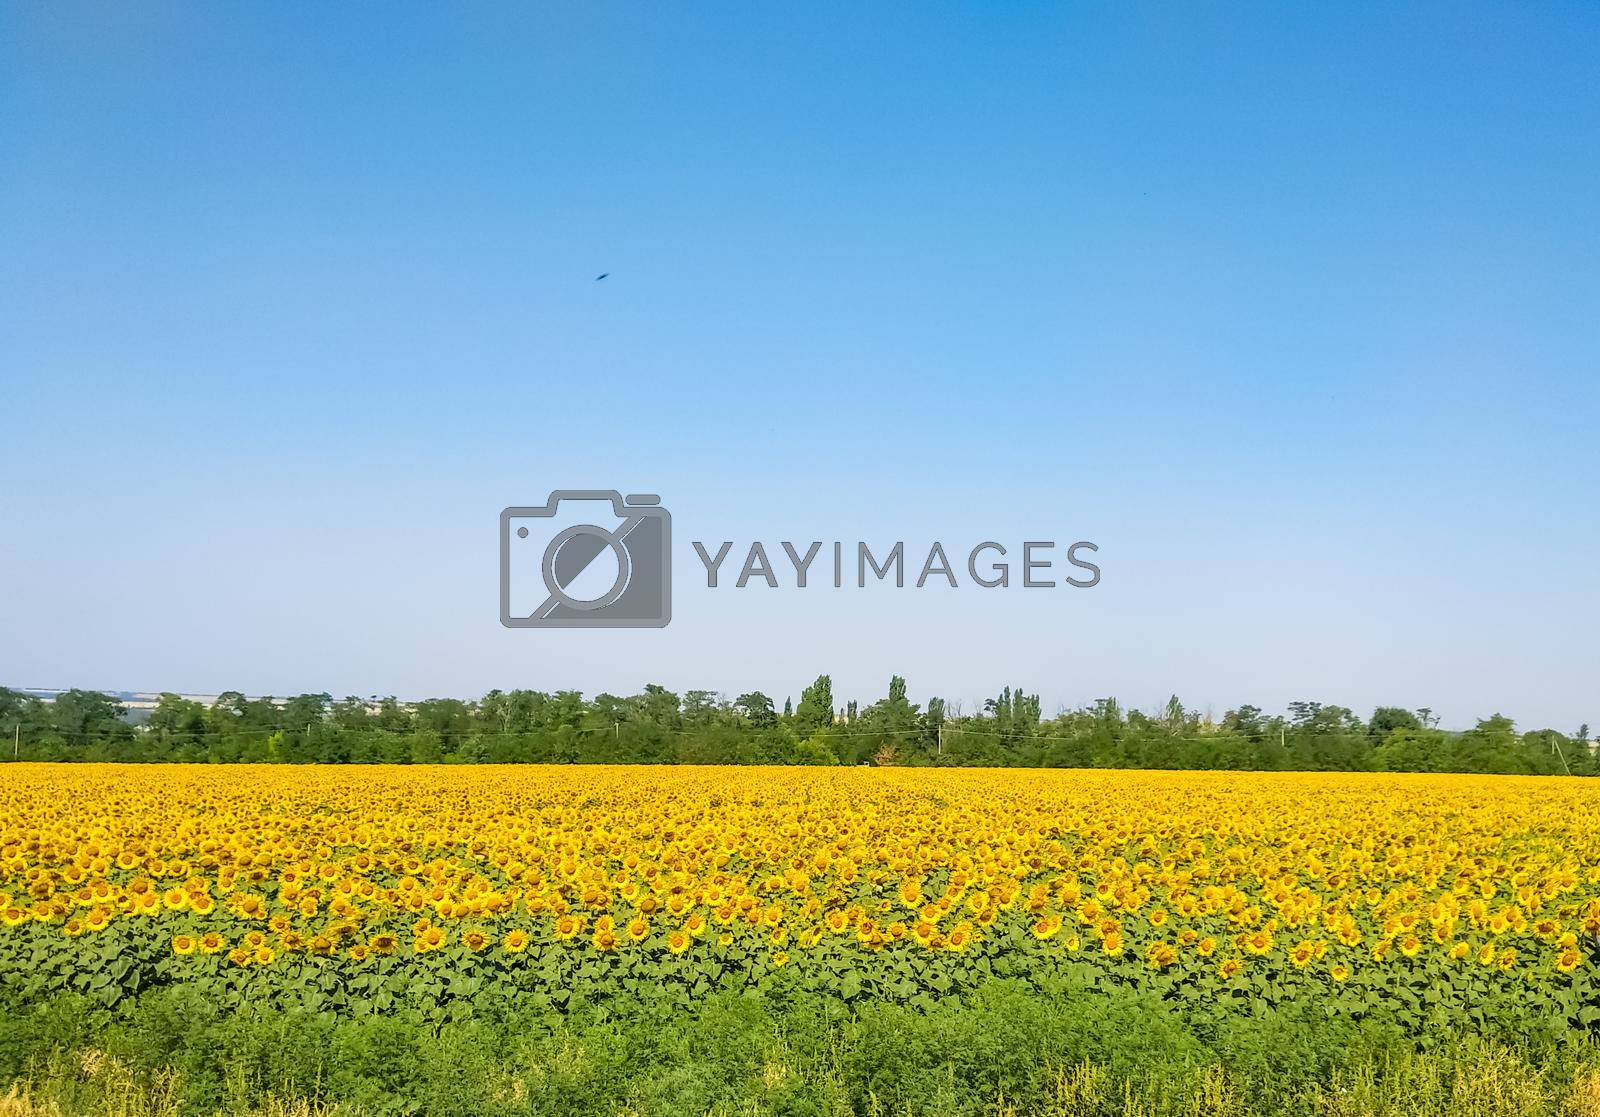 Panoramic Landscape Of Sunflower fields And blue Sky Against The Background Of clouds.Landscapes of sunflower fields on a bright sunny day with patterns formed on a natural background.